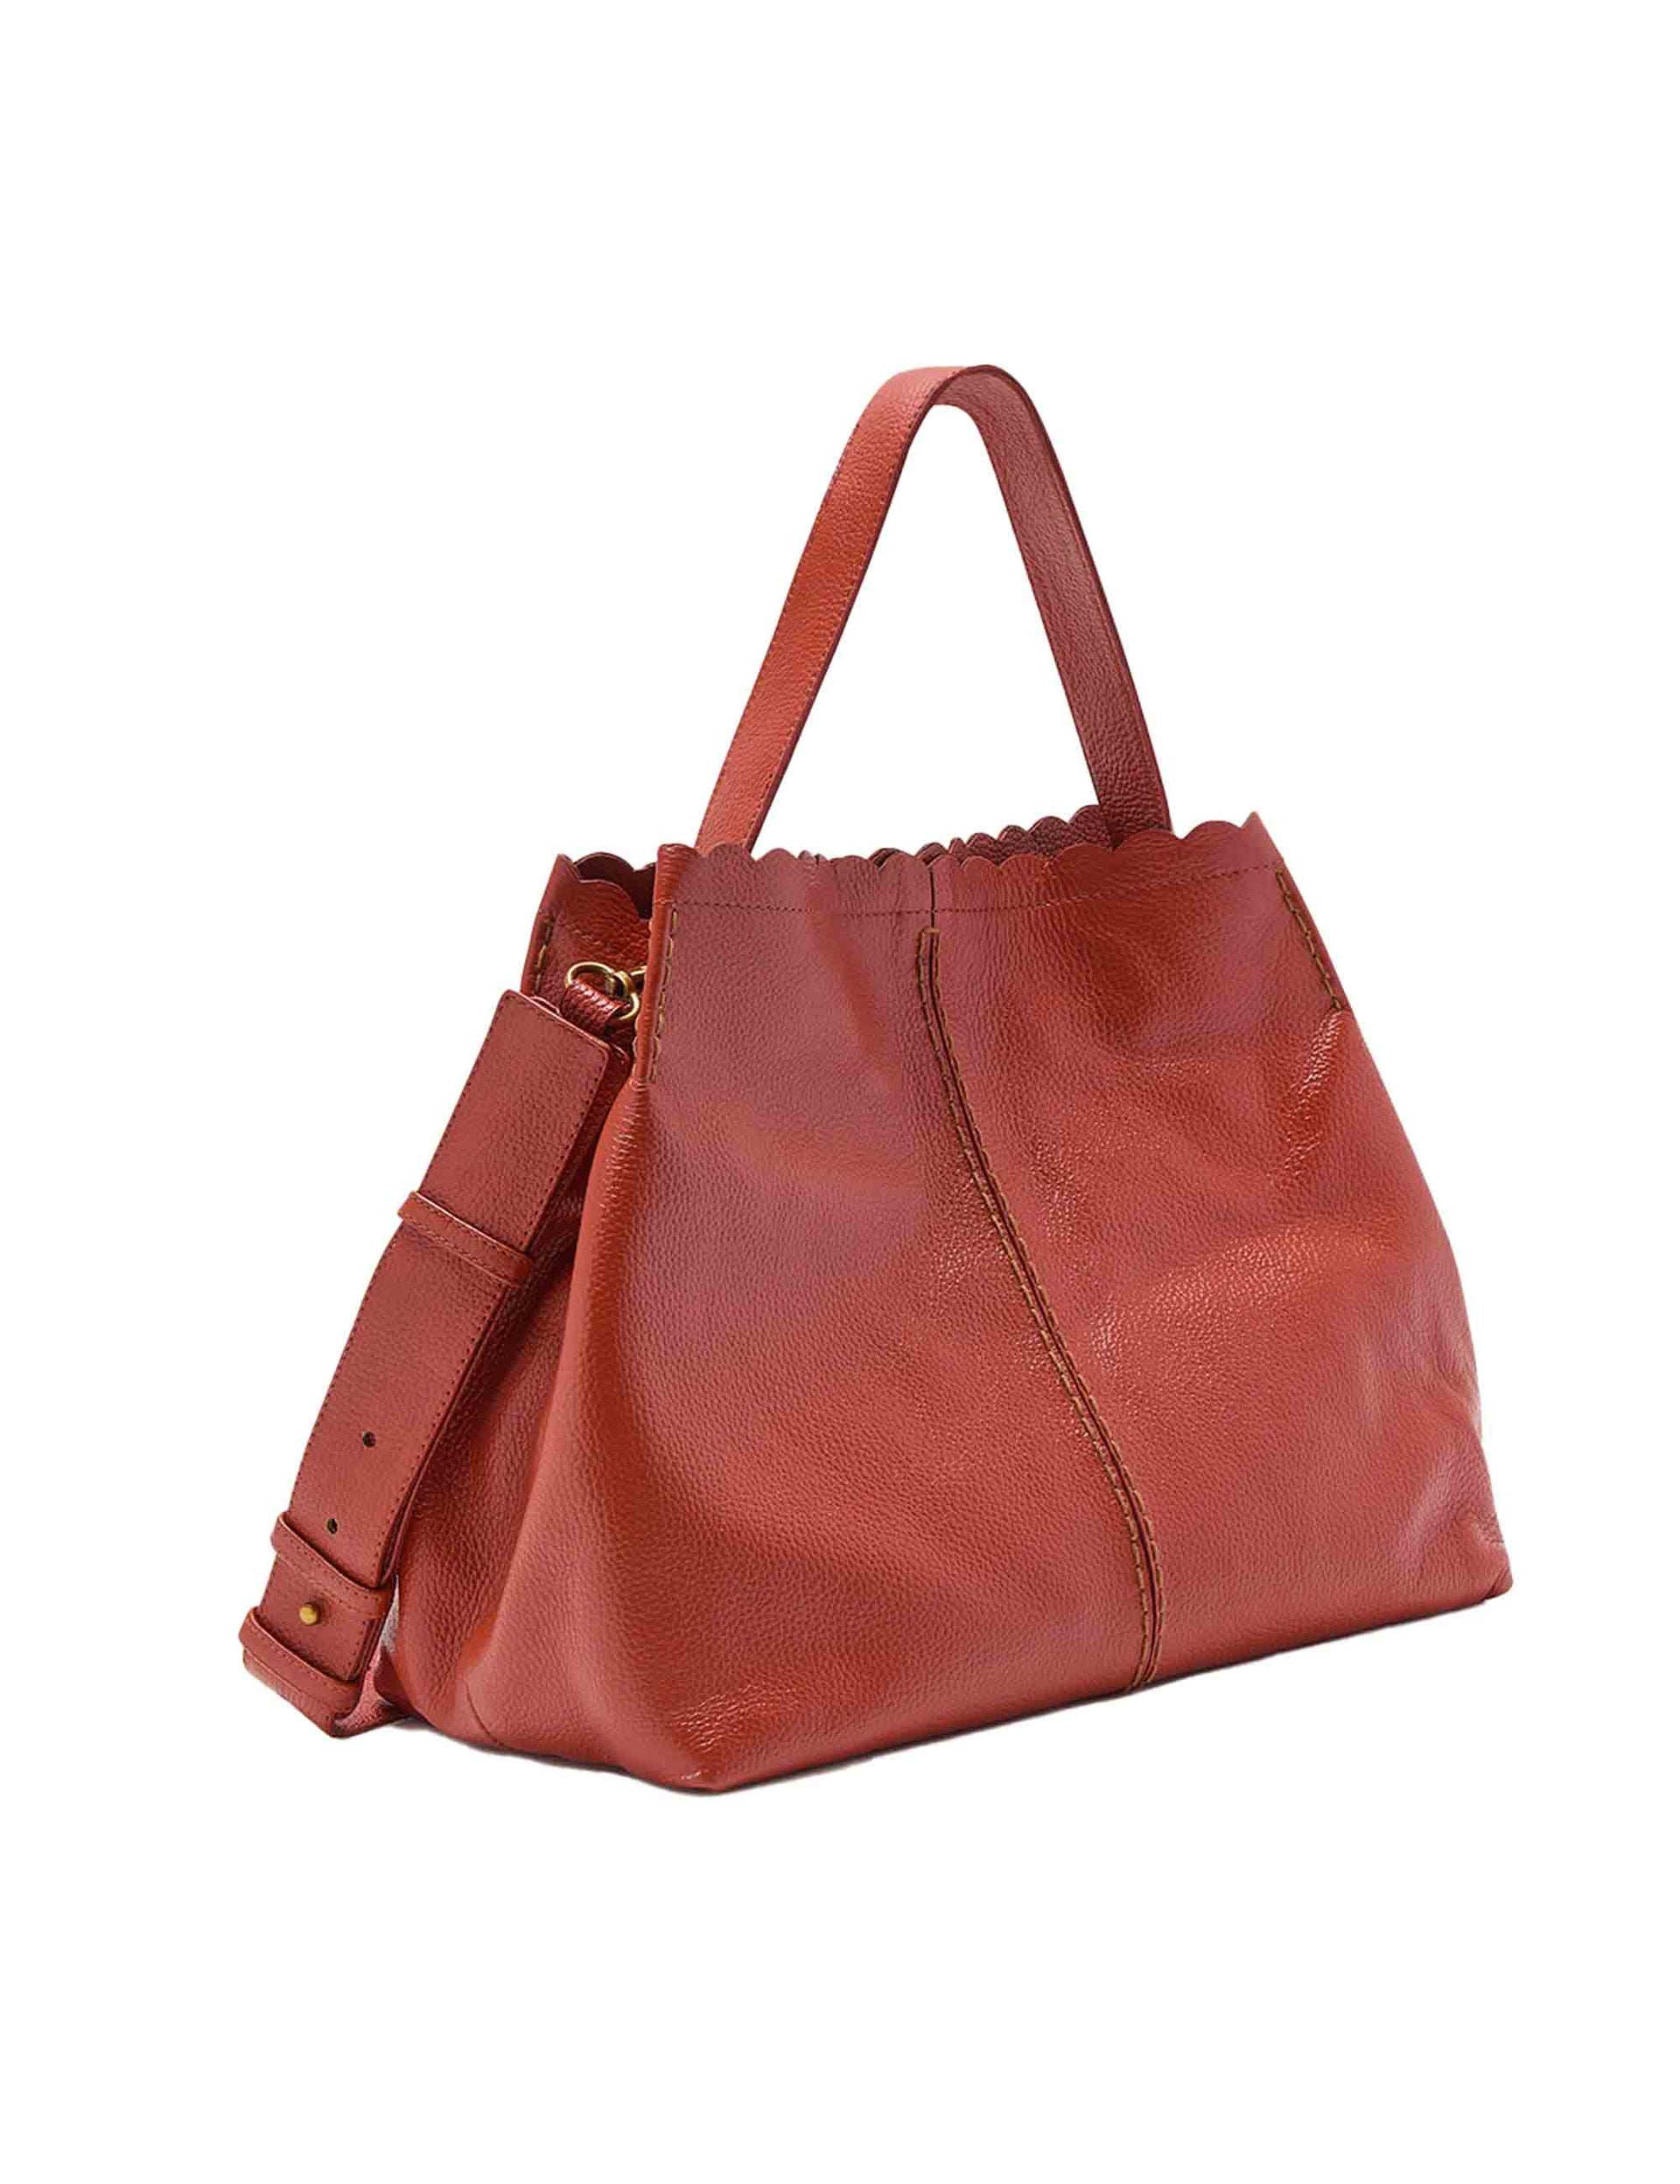 Text Tured women's shoulder bags in tan leather